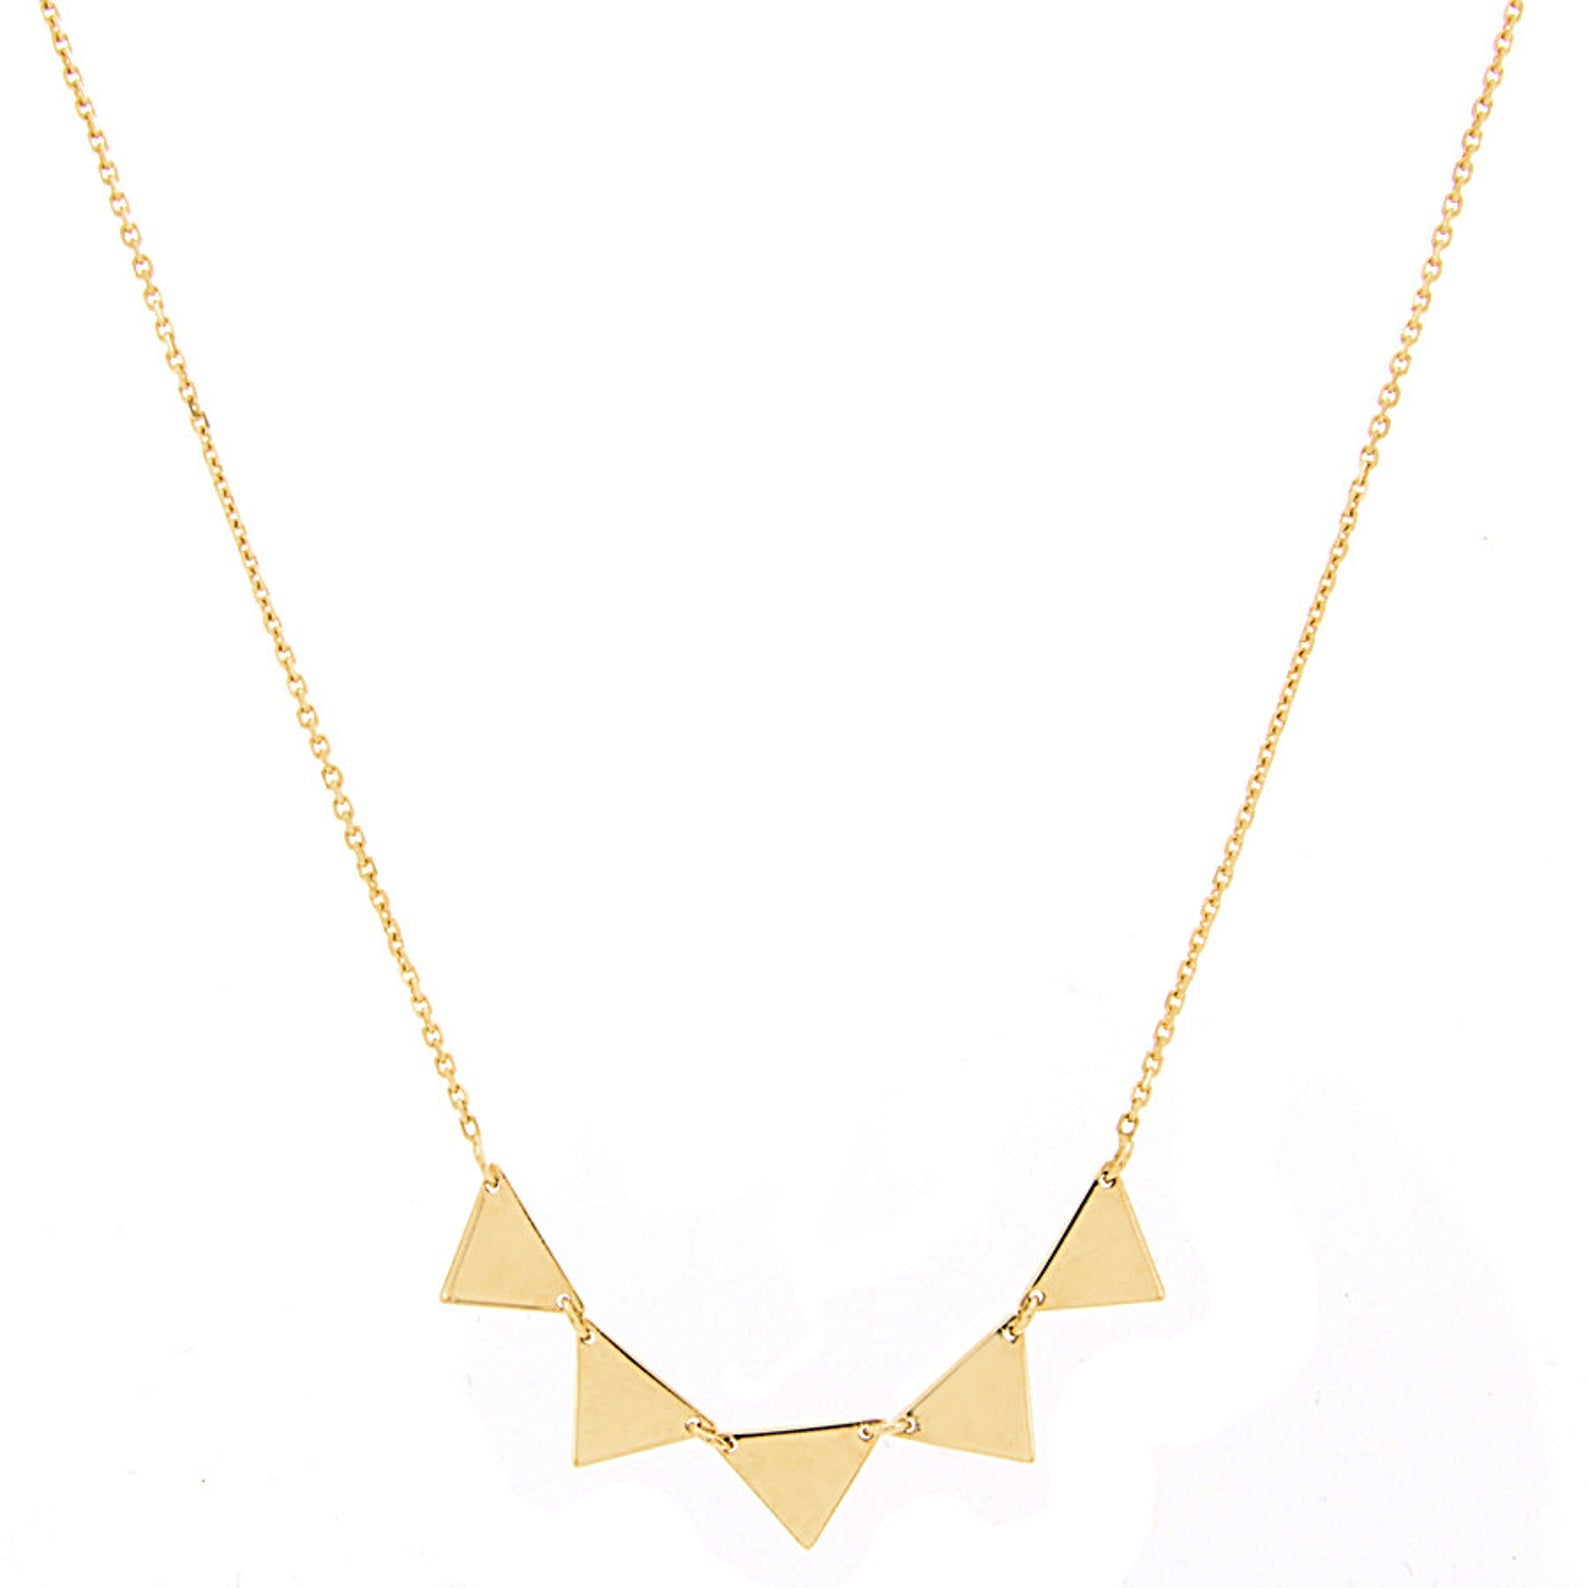 14K Yellow Gold Triangle Necklace